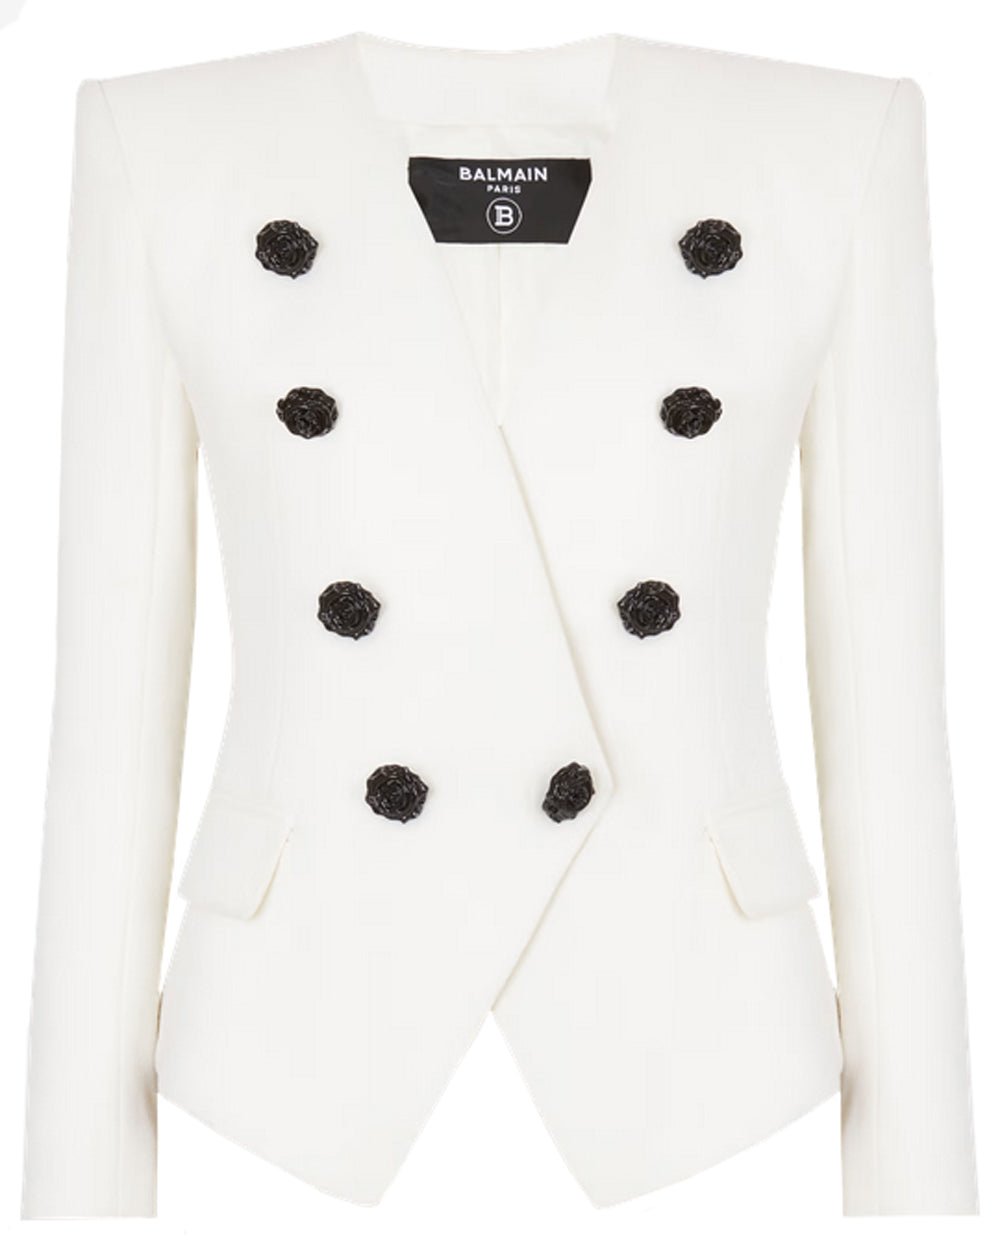 Blanc Crepe Collarless Double Breasted Jacket